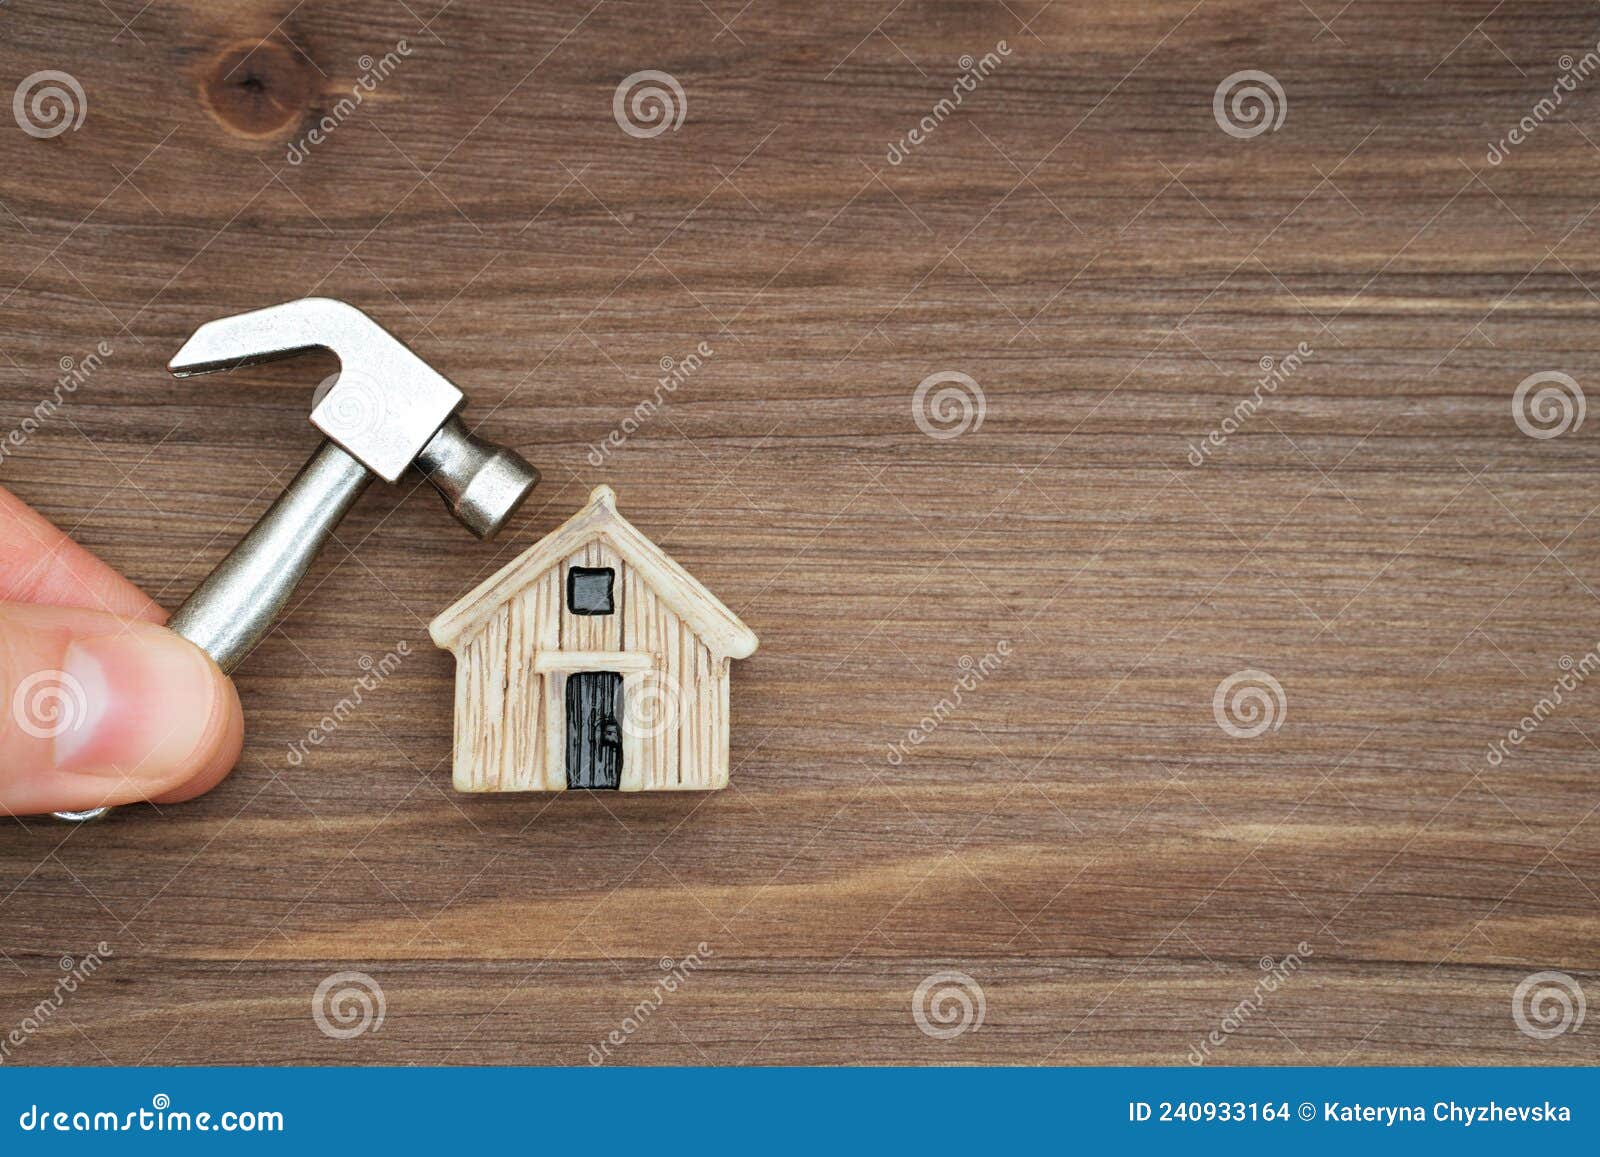 Holding a Miniature Hammer Close To a Tiny House Stock Photo - Image of  holding, industry: 240933164